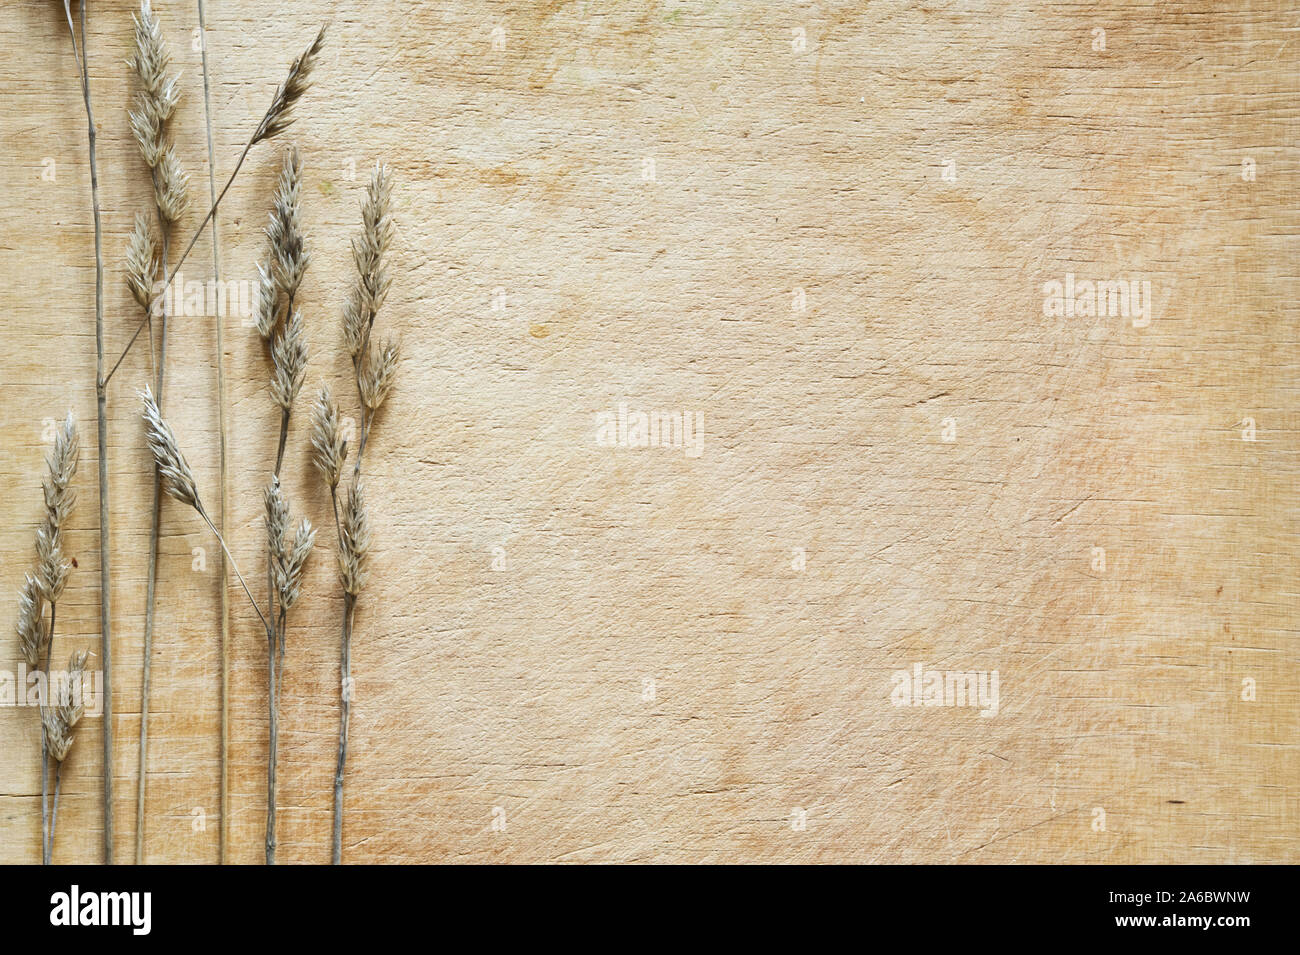 Close-up of dried grasses on a wooden surface. Stock Photo